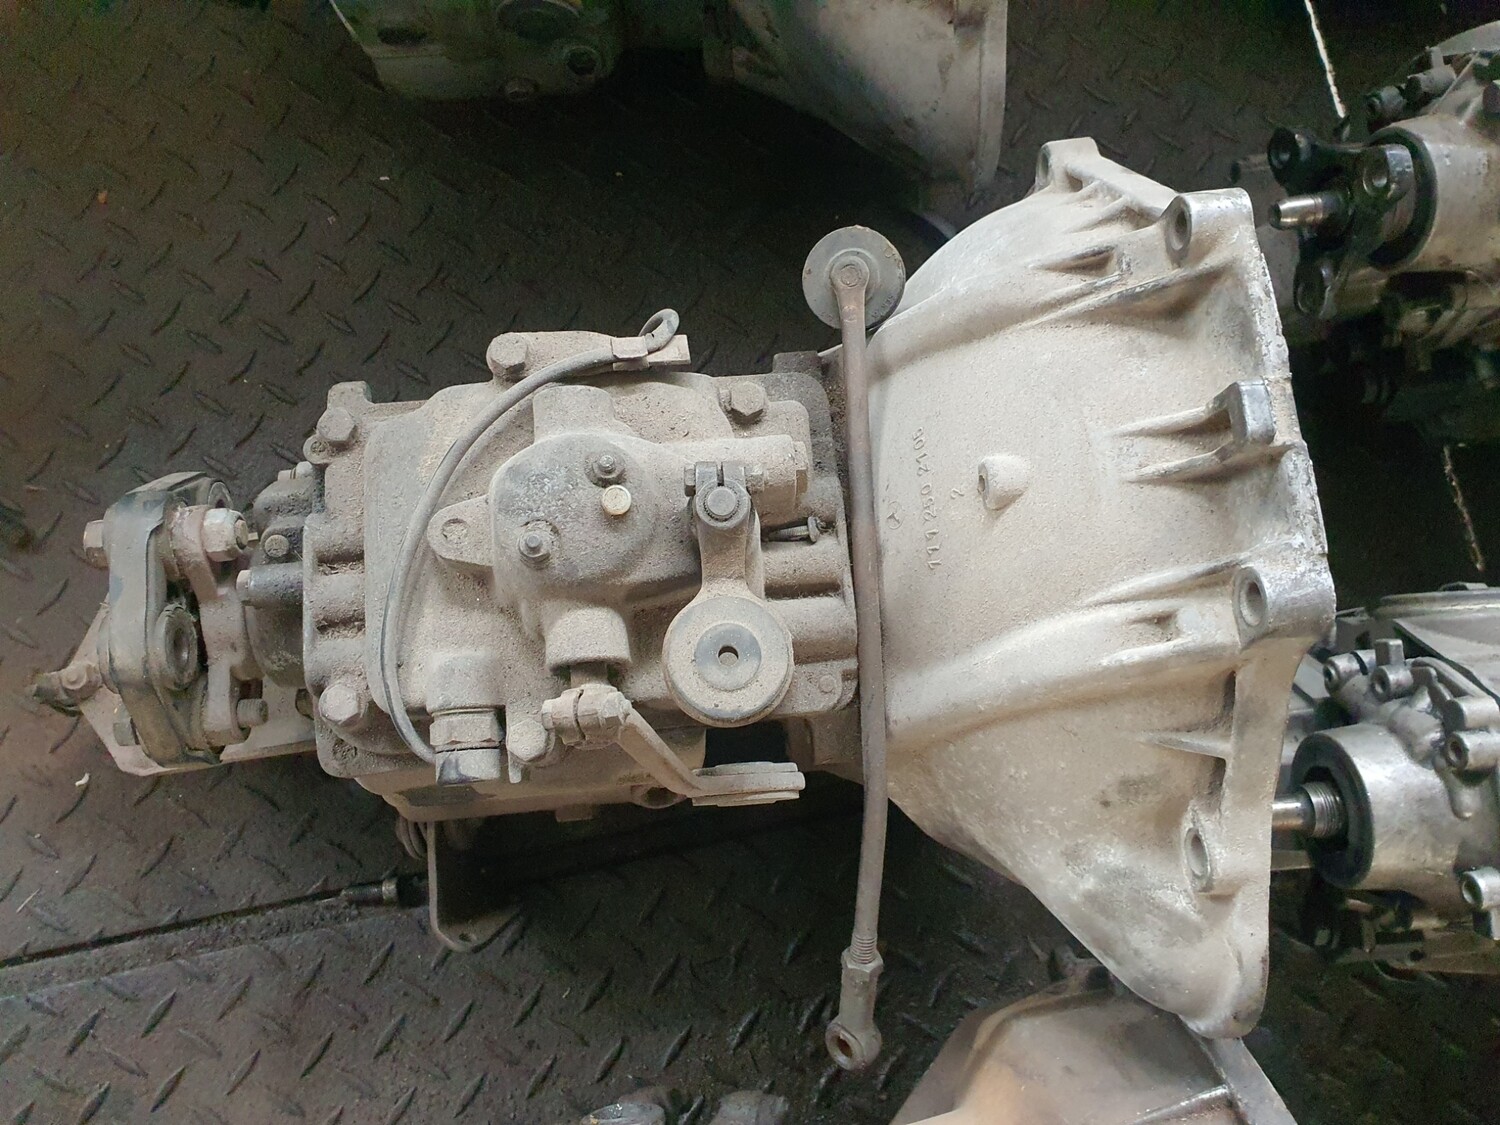 Mercedes-Benz Manual Column Shift Gearbox (W114/5 and W108)